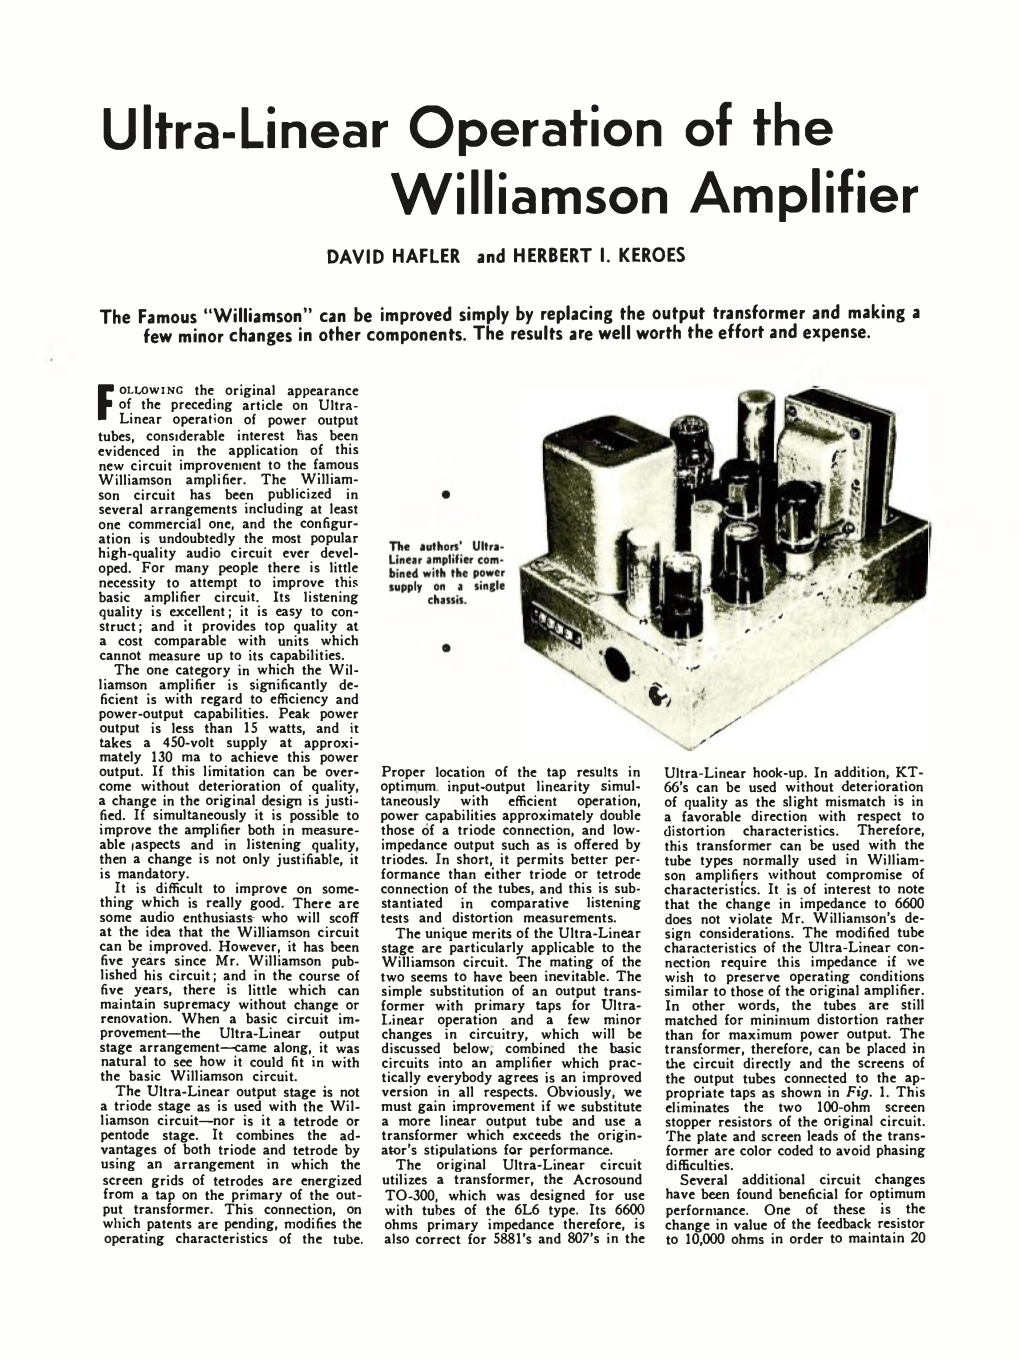 Ultra-Linear Operation of the Williamson Amplifier